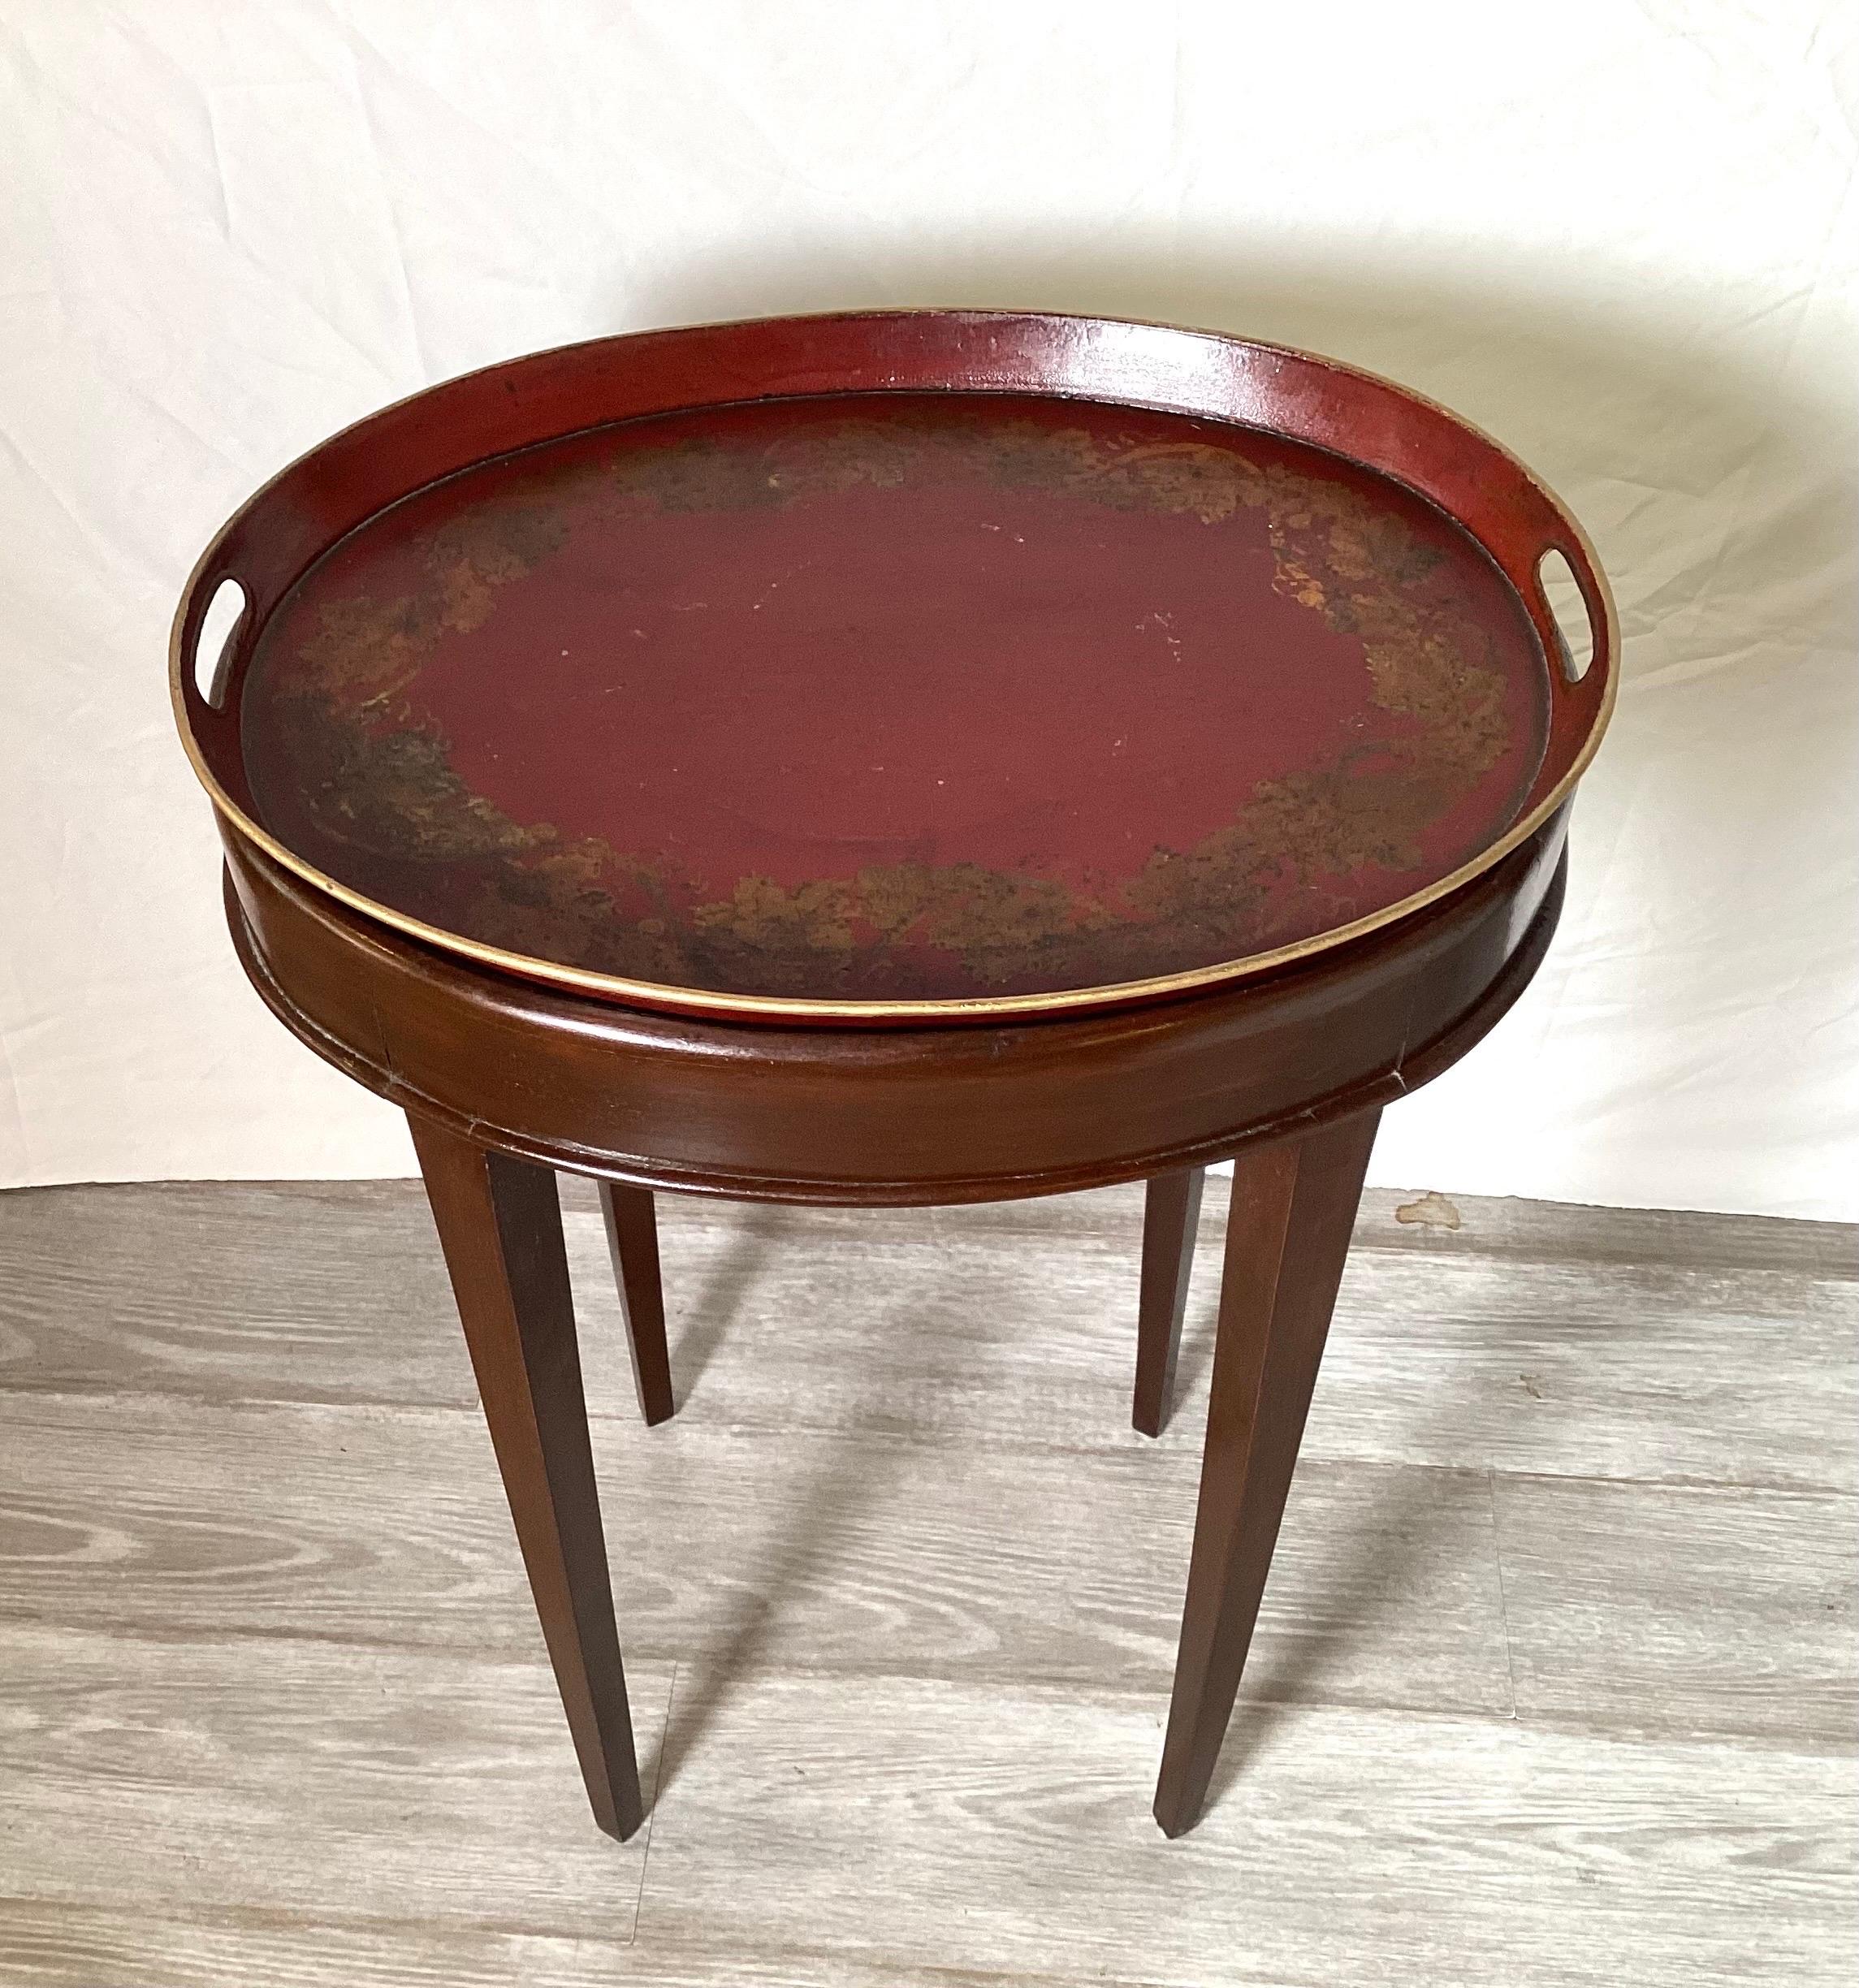 An Antique 19th century Italian Tole tray with custom mahogany base. The oval tray in a cinnabar red color with light gold details. The base, made in the 1920s of solid Mahogany 20 wide, 15 deep, 27.5 high.